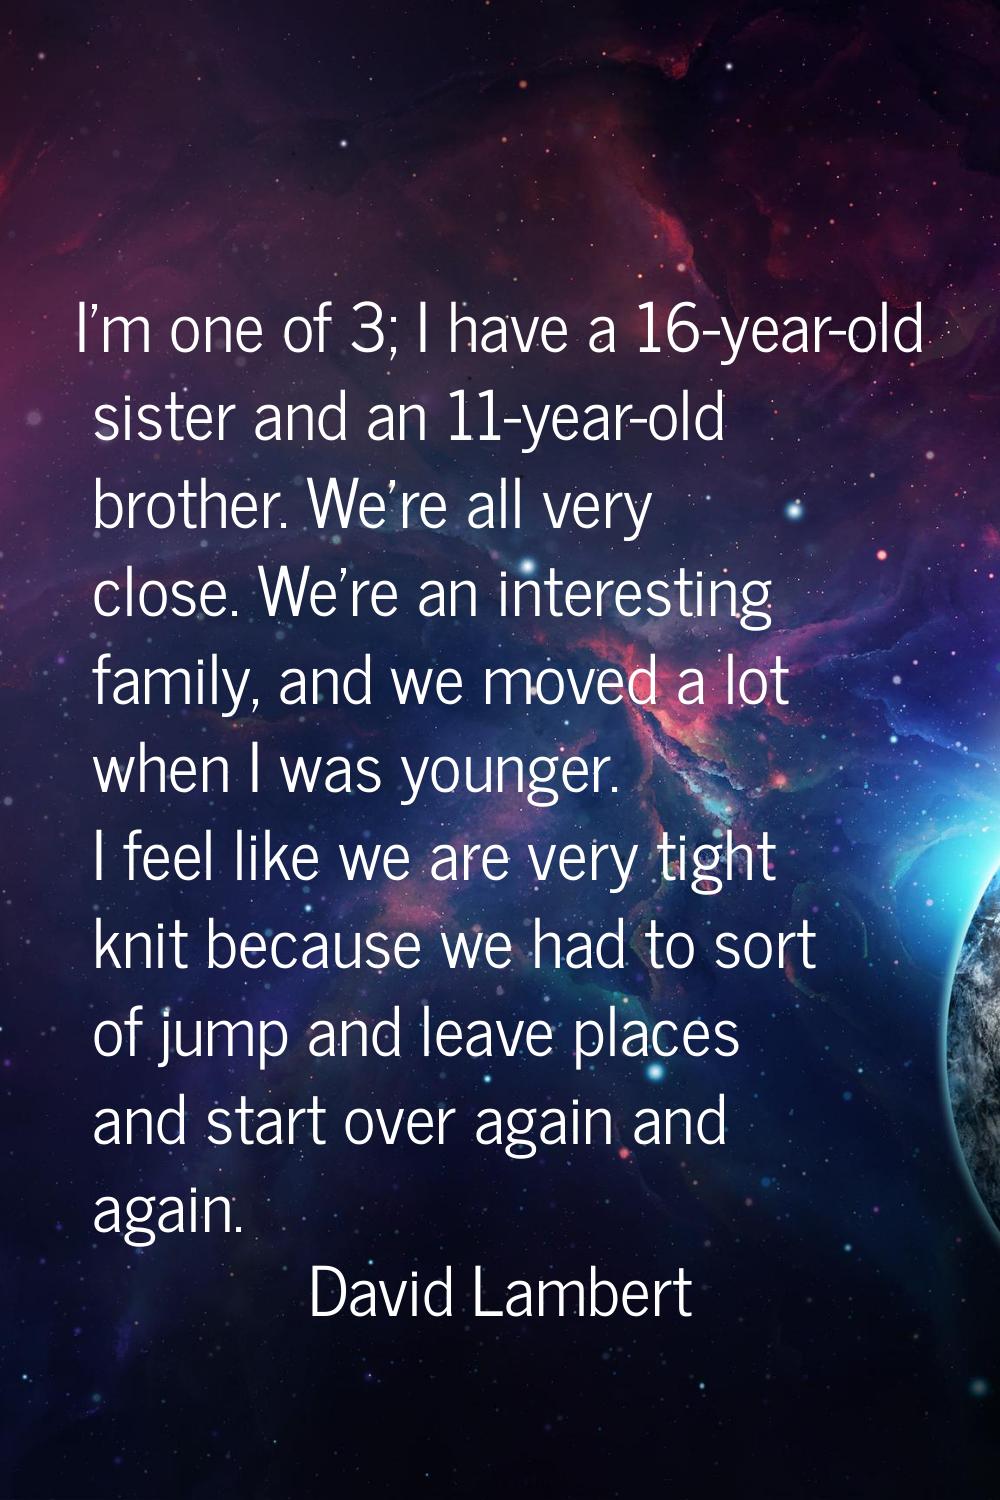 I'm one of 3; I have a 16-year-old sister and an 11-year-old brother. We're all very close. We're a